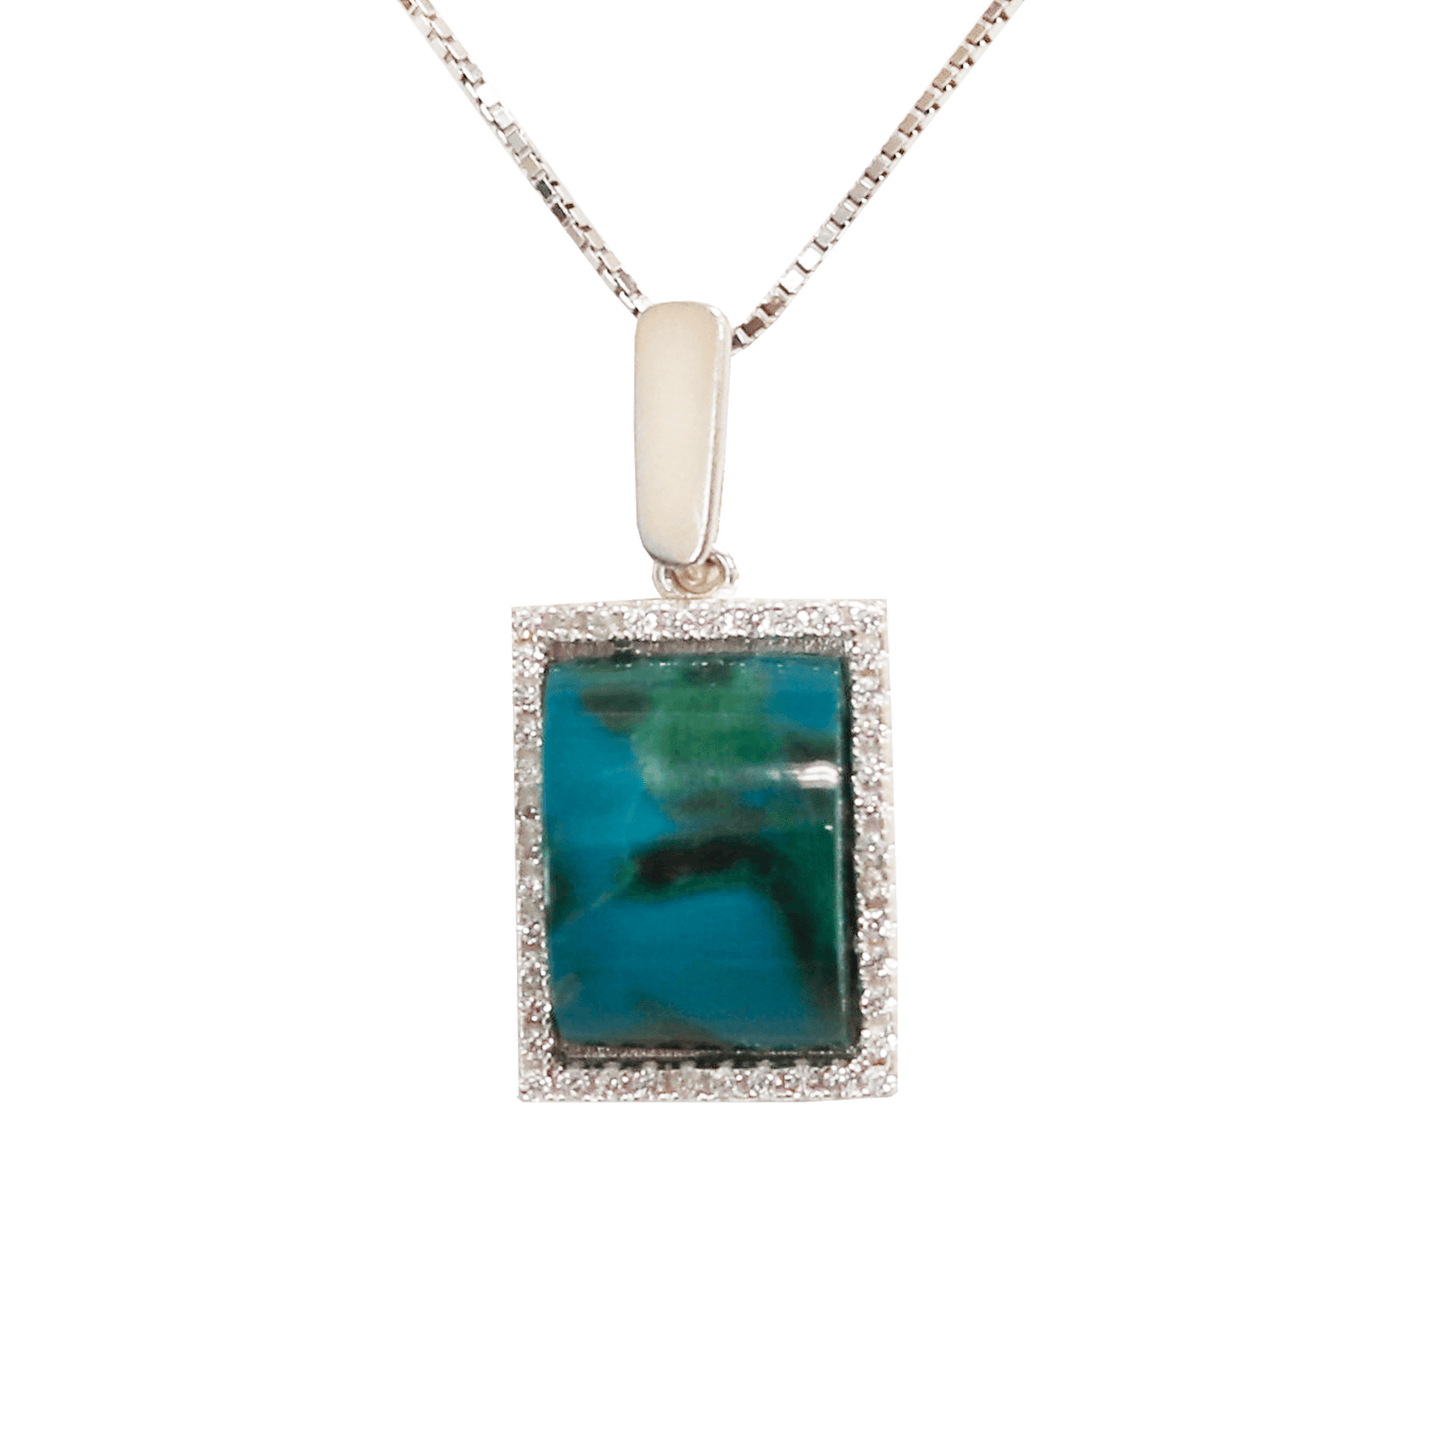 Eilat Stone Square Necklace with Crystal Border